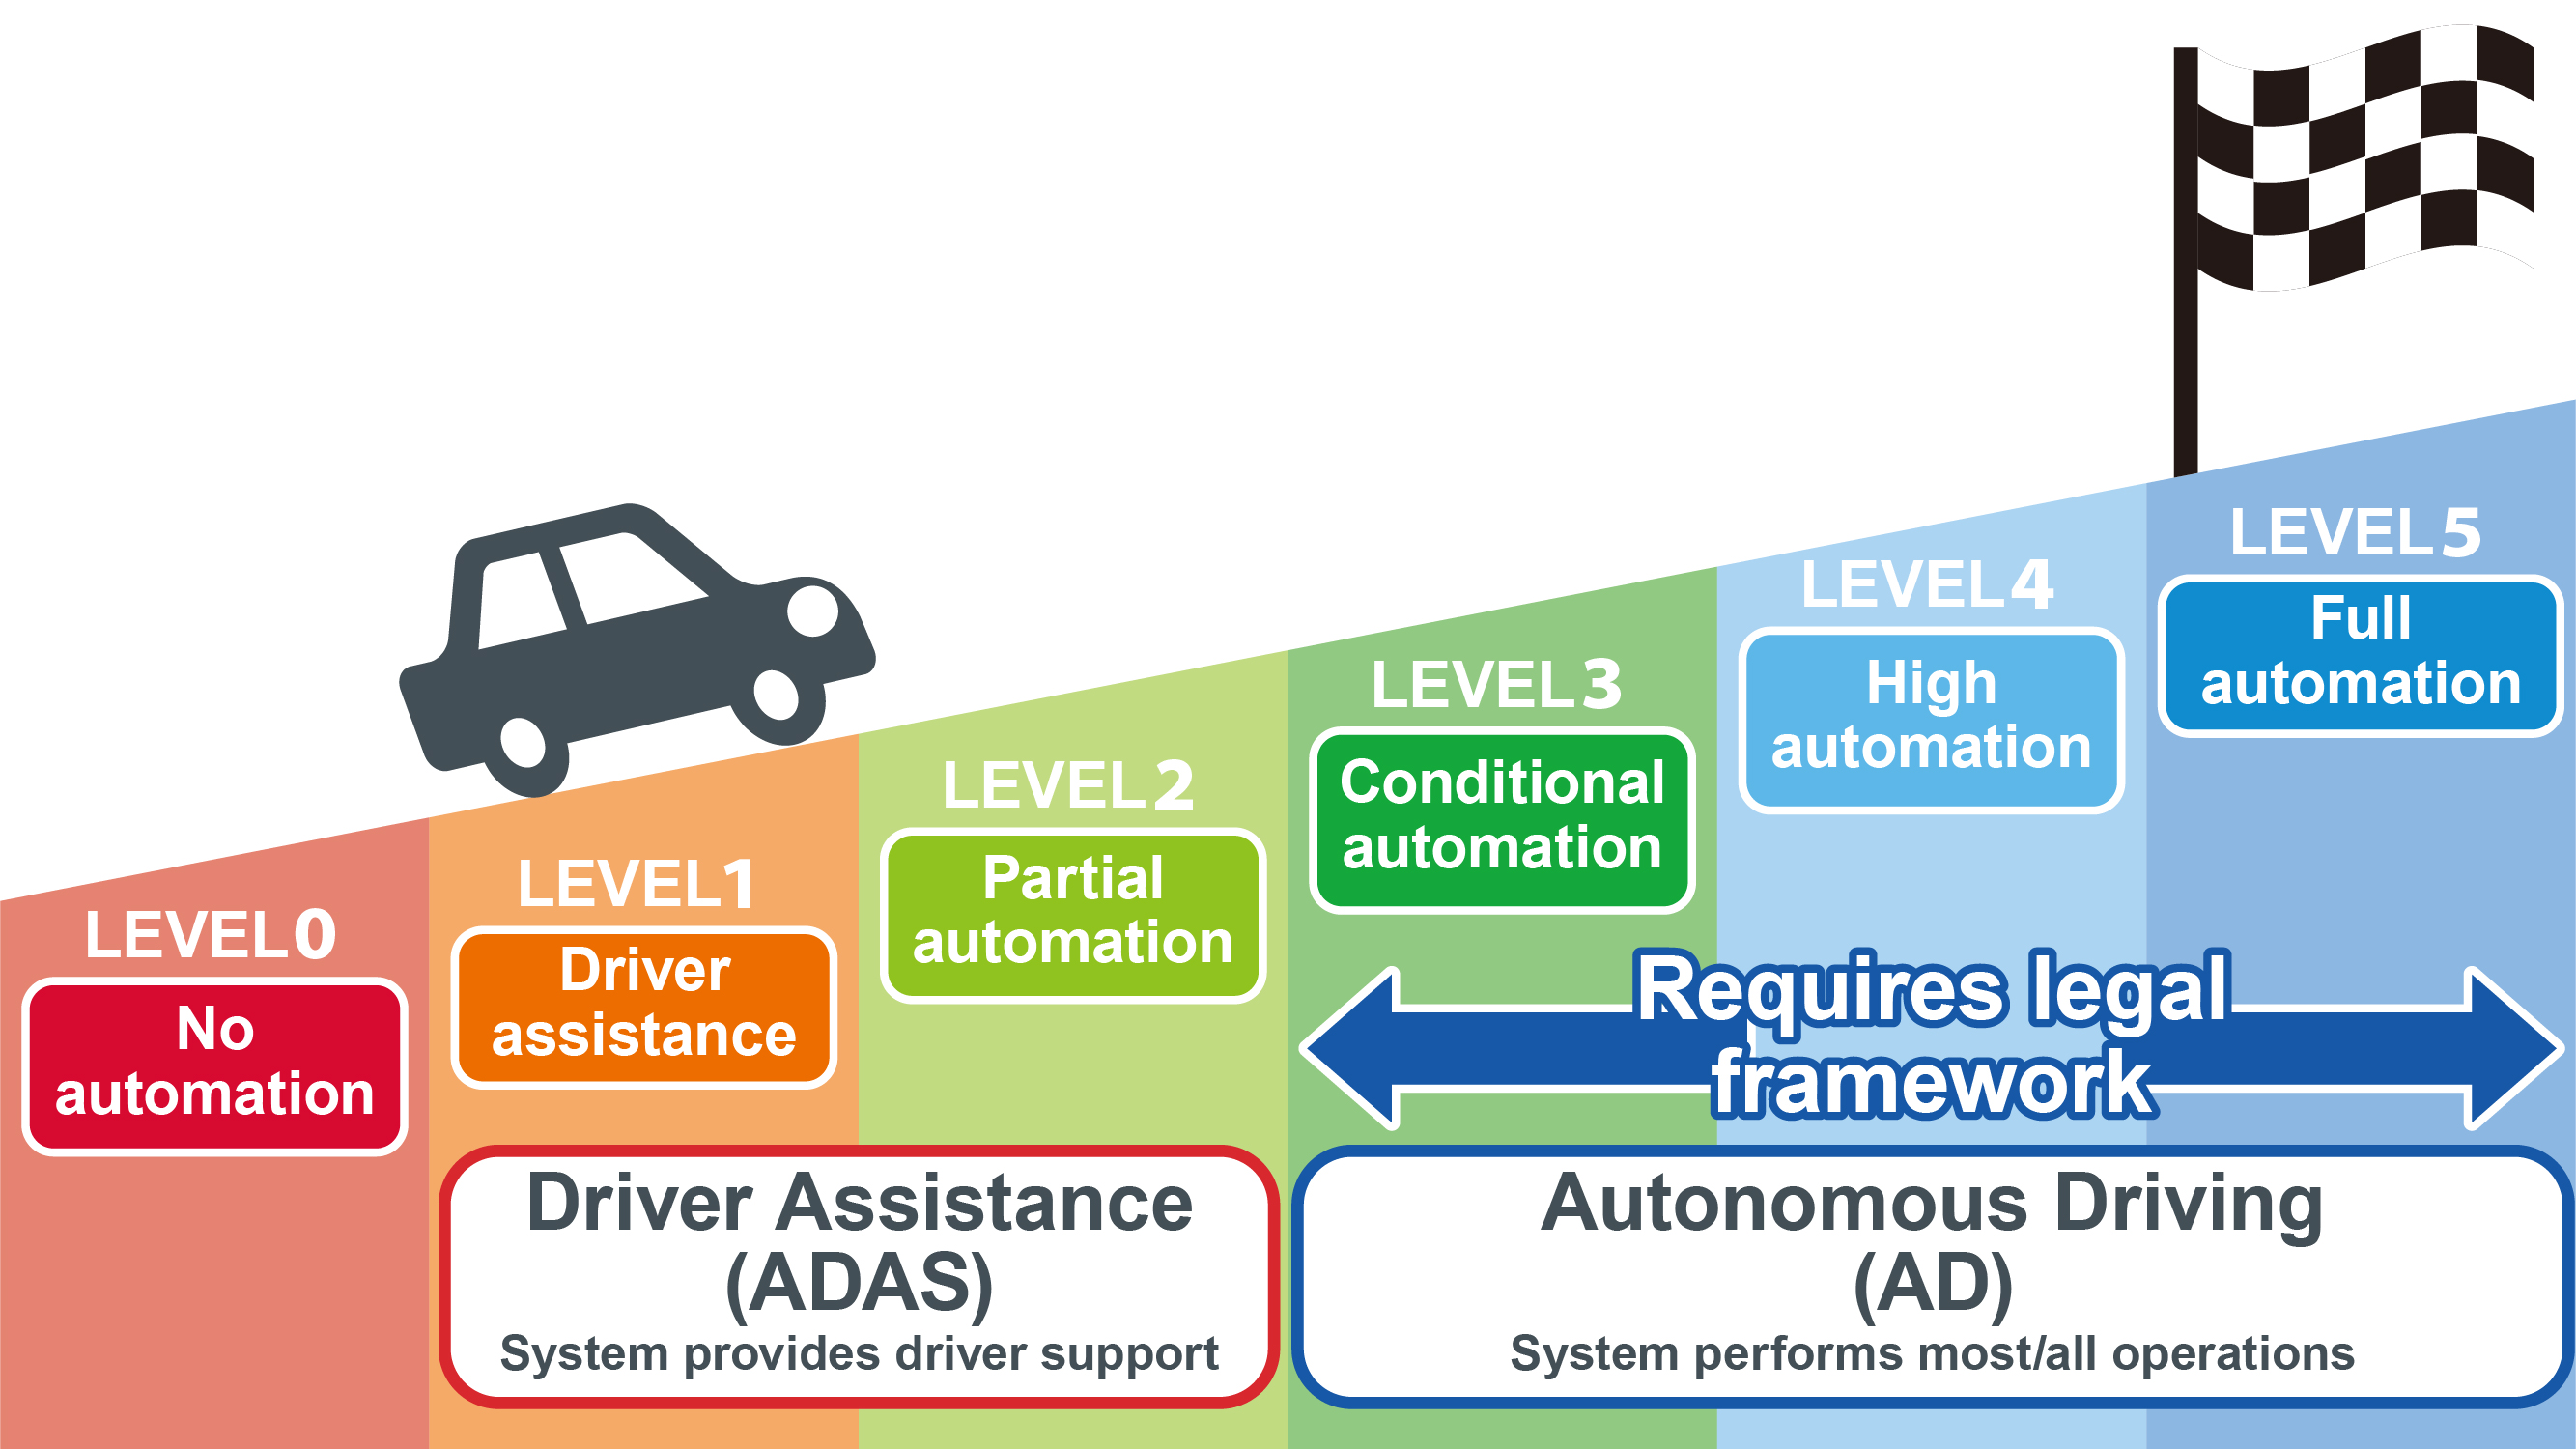 Briefly explains the differences between ADAS and autonomous driving